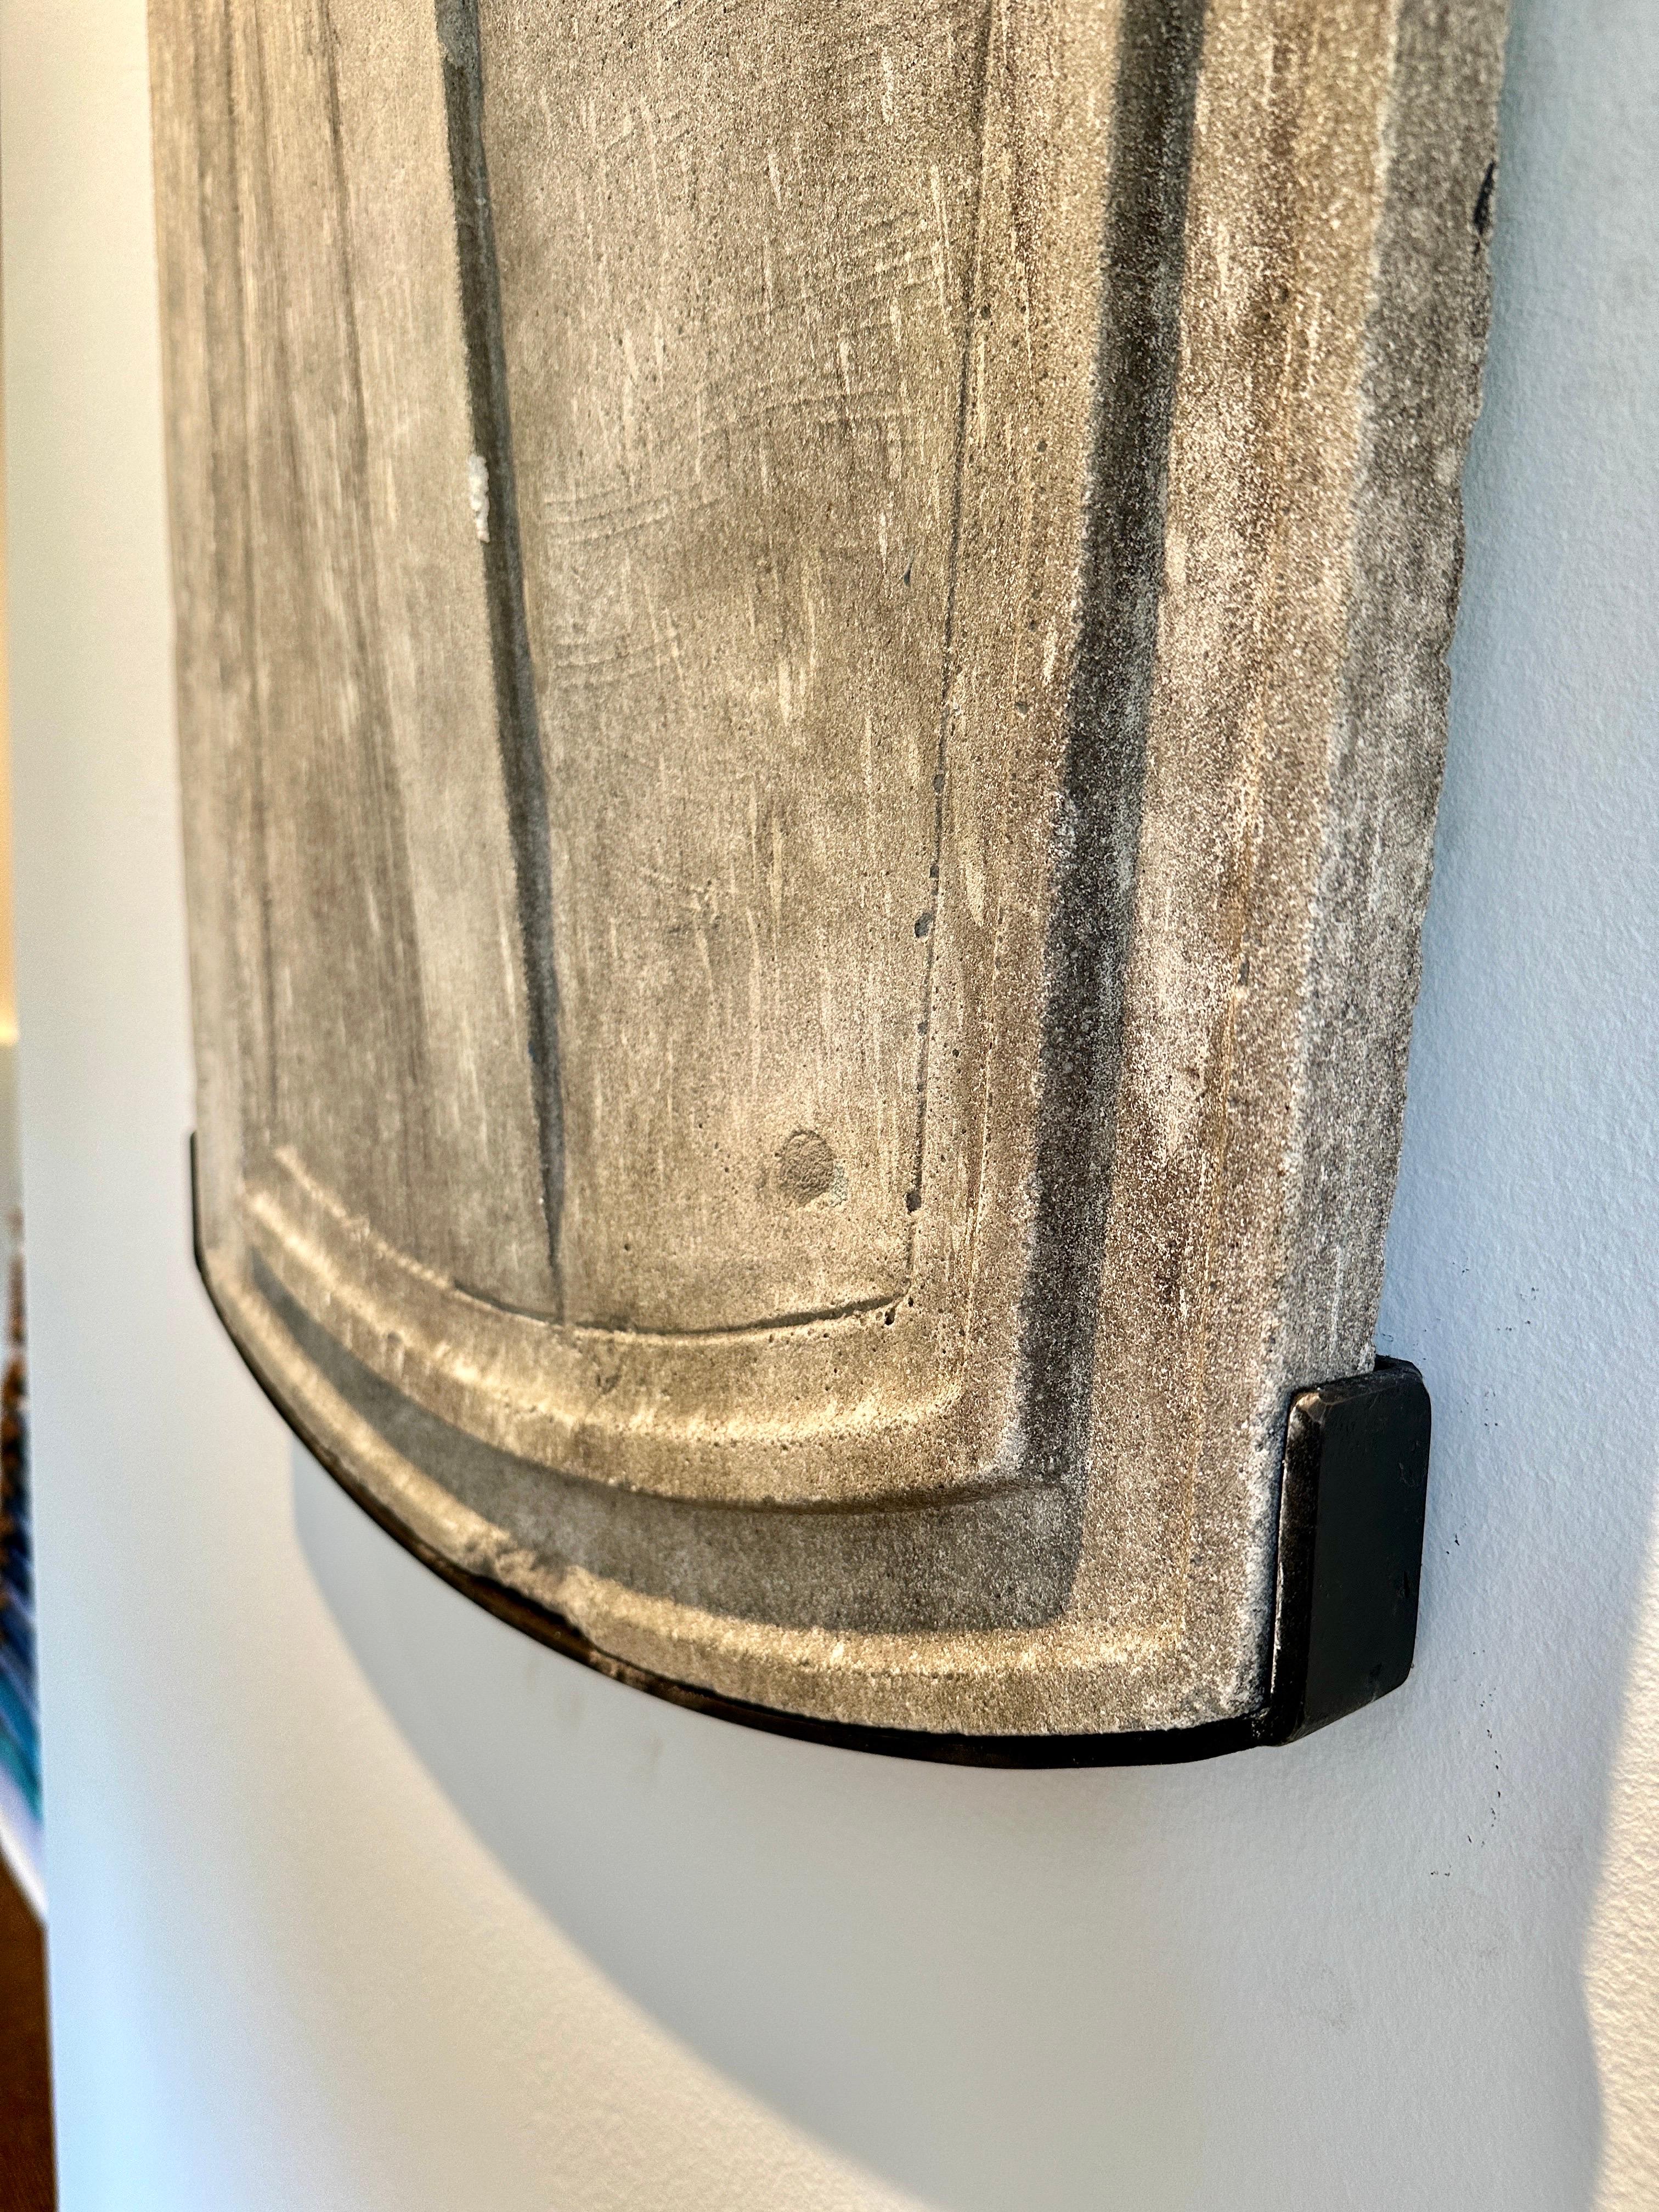 This is a wonderful antique architectural element mounted to custom iron wall bracket for best display and viewing.  THIS ITEM IS LOCATED AND WILL SHIP FROM OUR EAST HAMPTON, NY SHOWROOM.